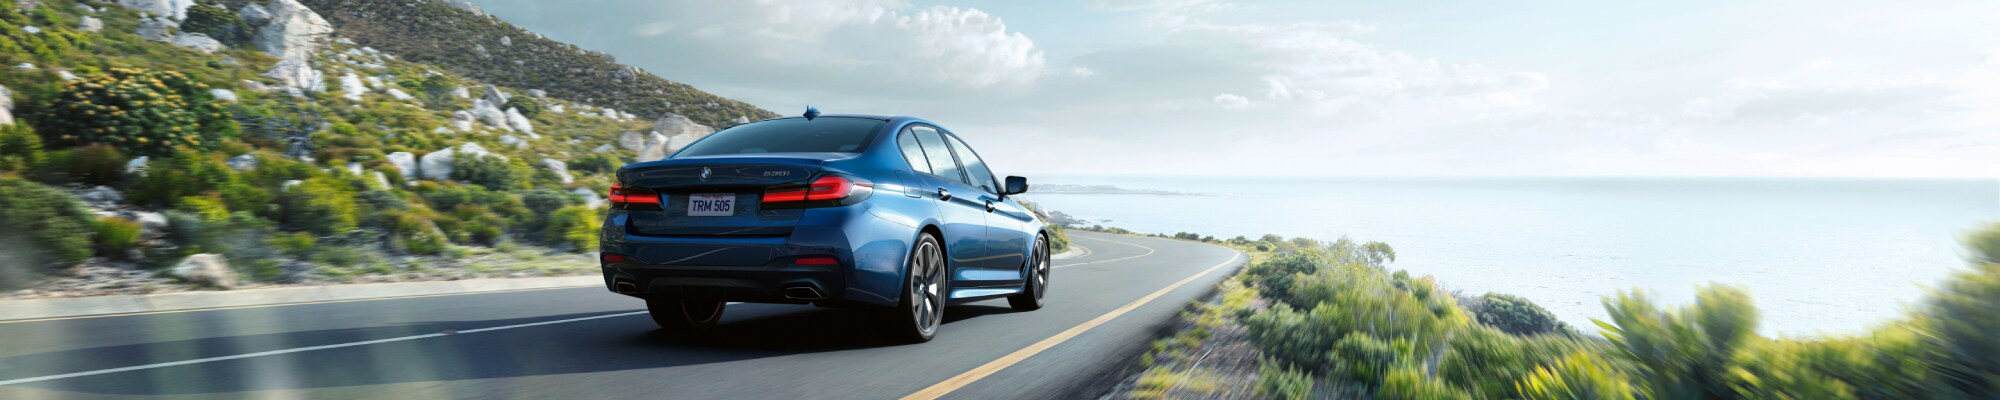 New BMW 5 series driving by the coast